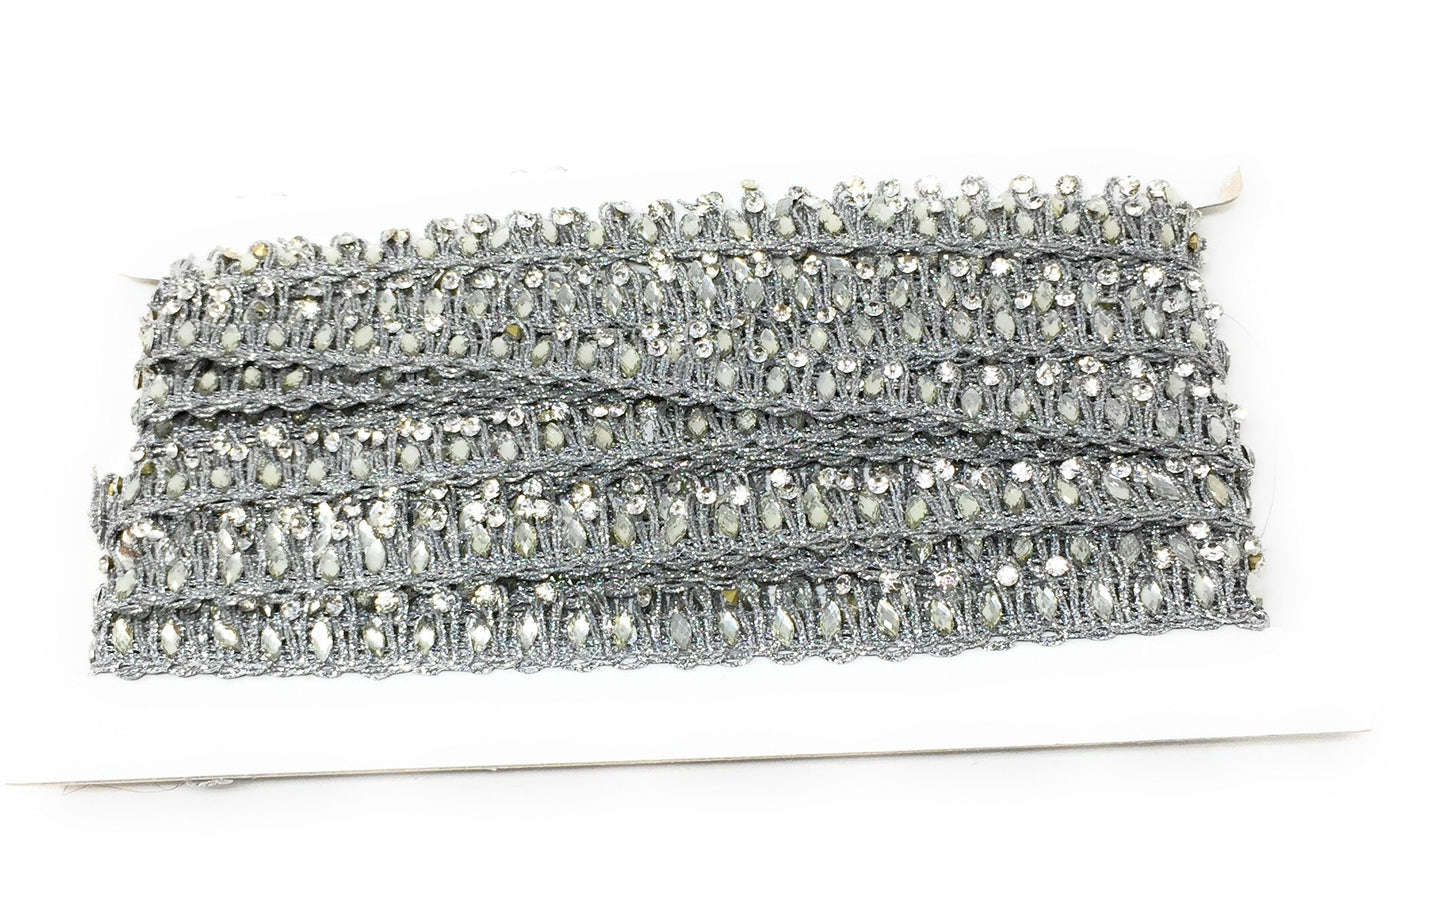 Silver Beaded Sequins Saree Border Trim - 9 Meter Roll